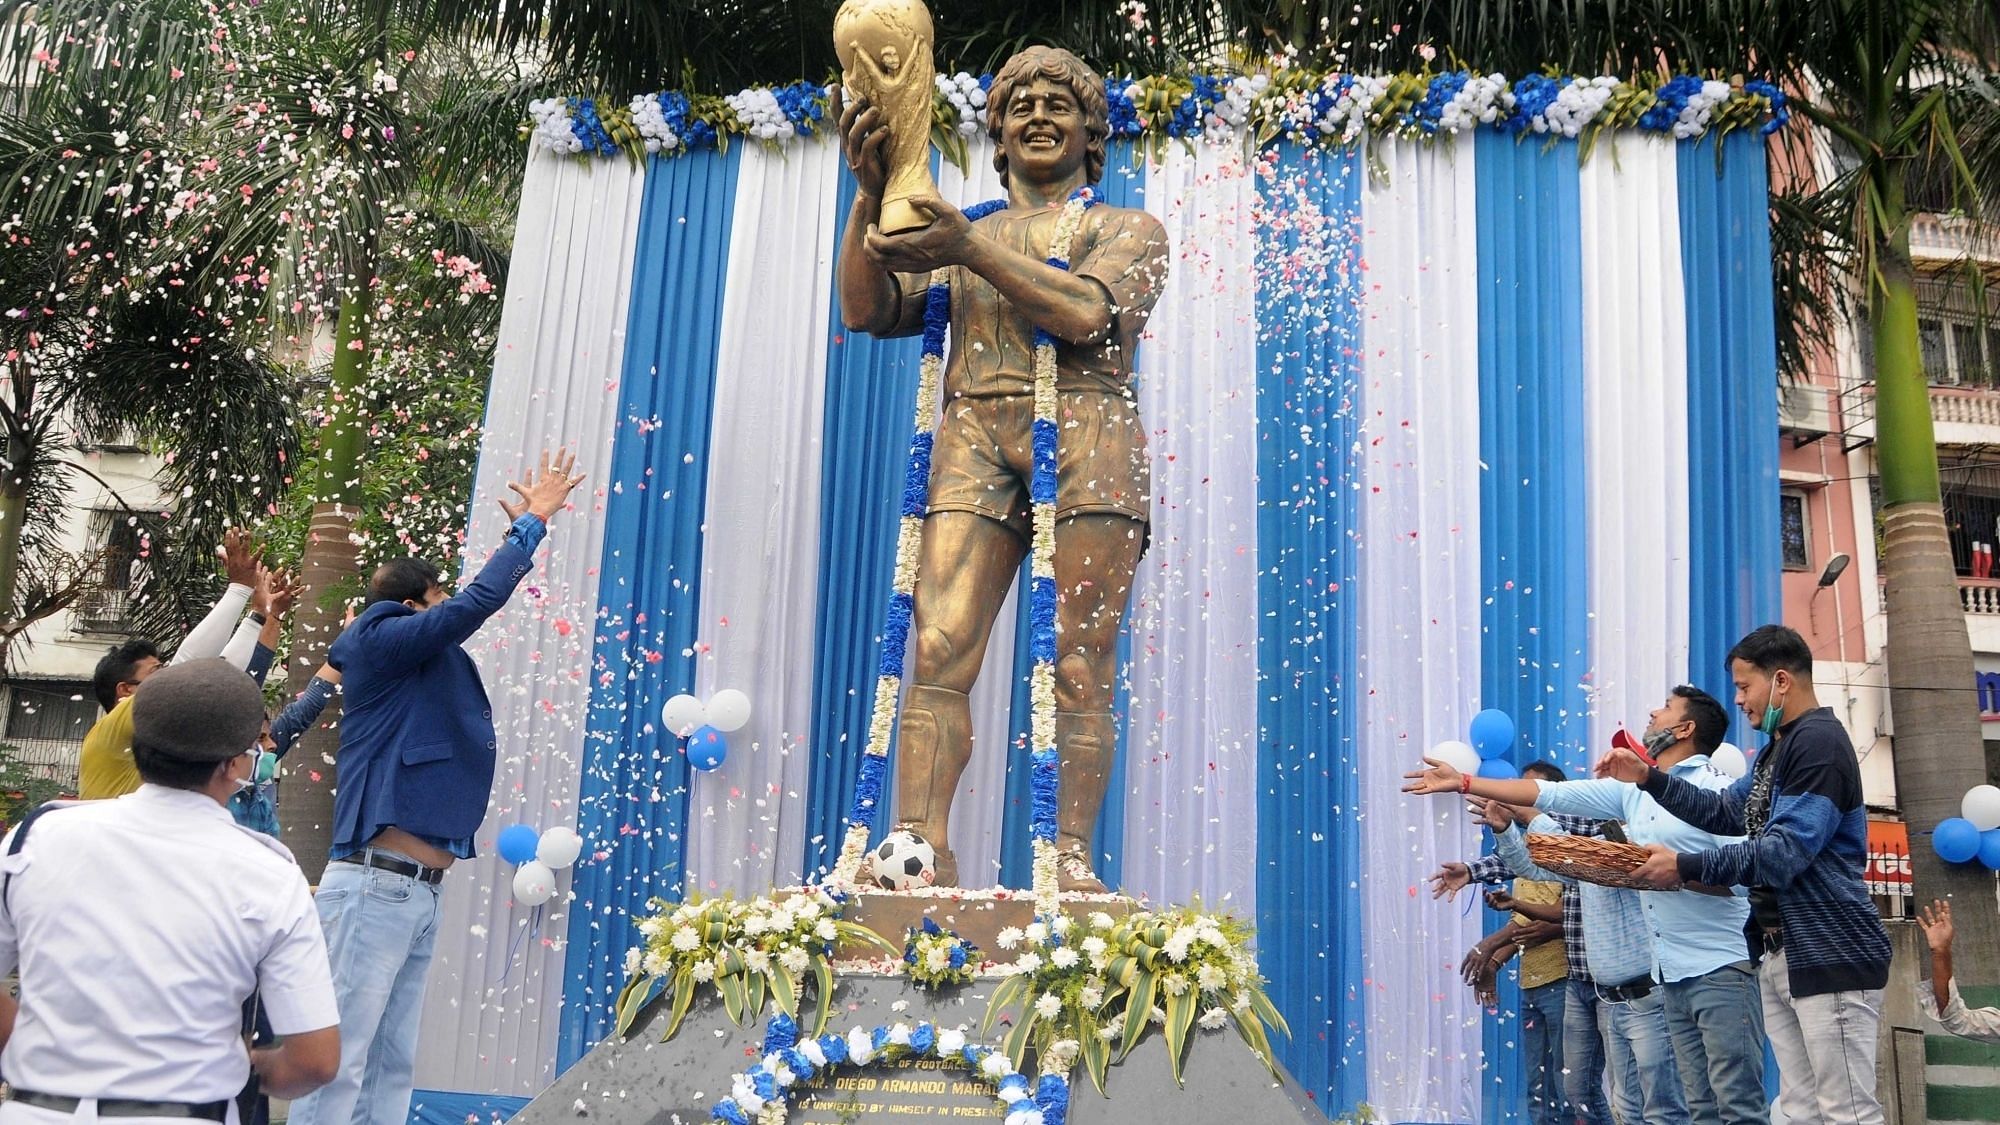 Shreebhumi Sporting Club, which had hosted Maradona the last time he came to India, pays its respects to the football legend.